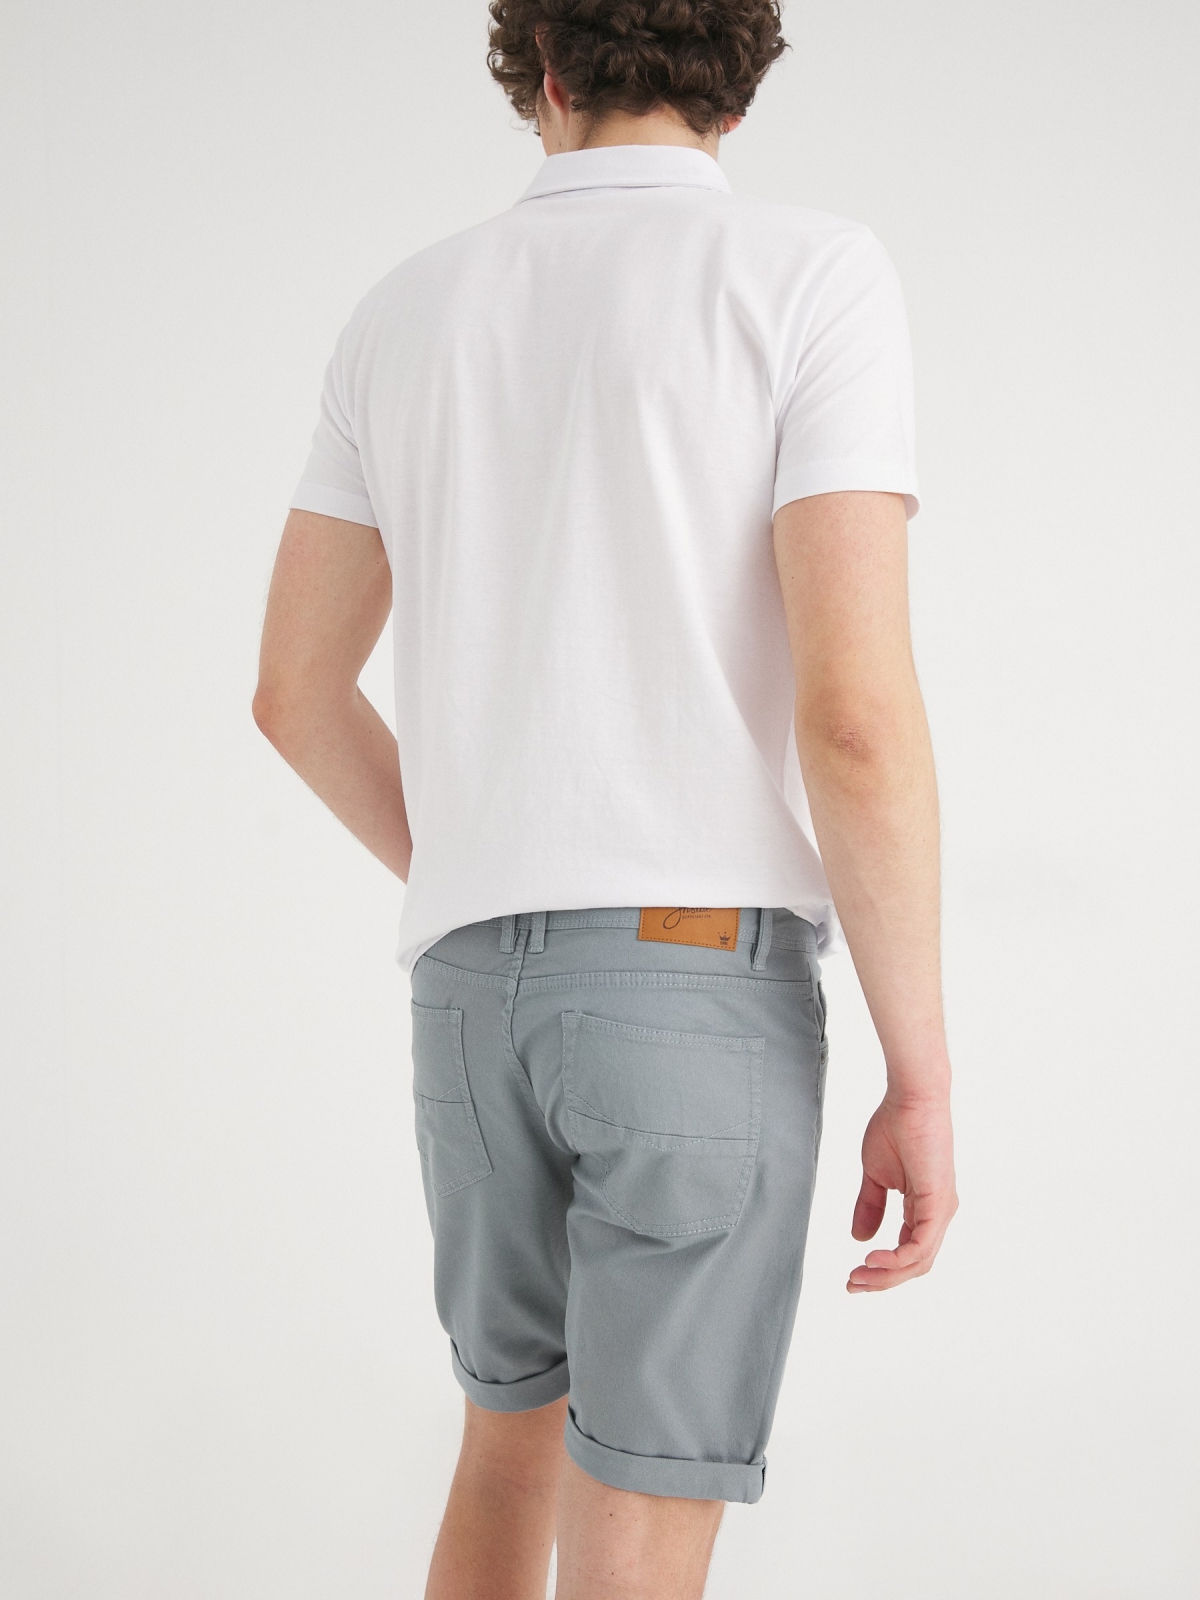 Bermuda short with five pockets grey middle back view